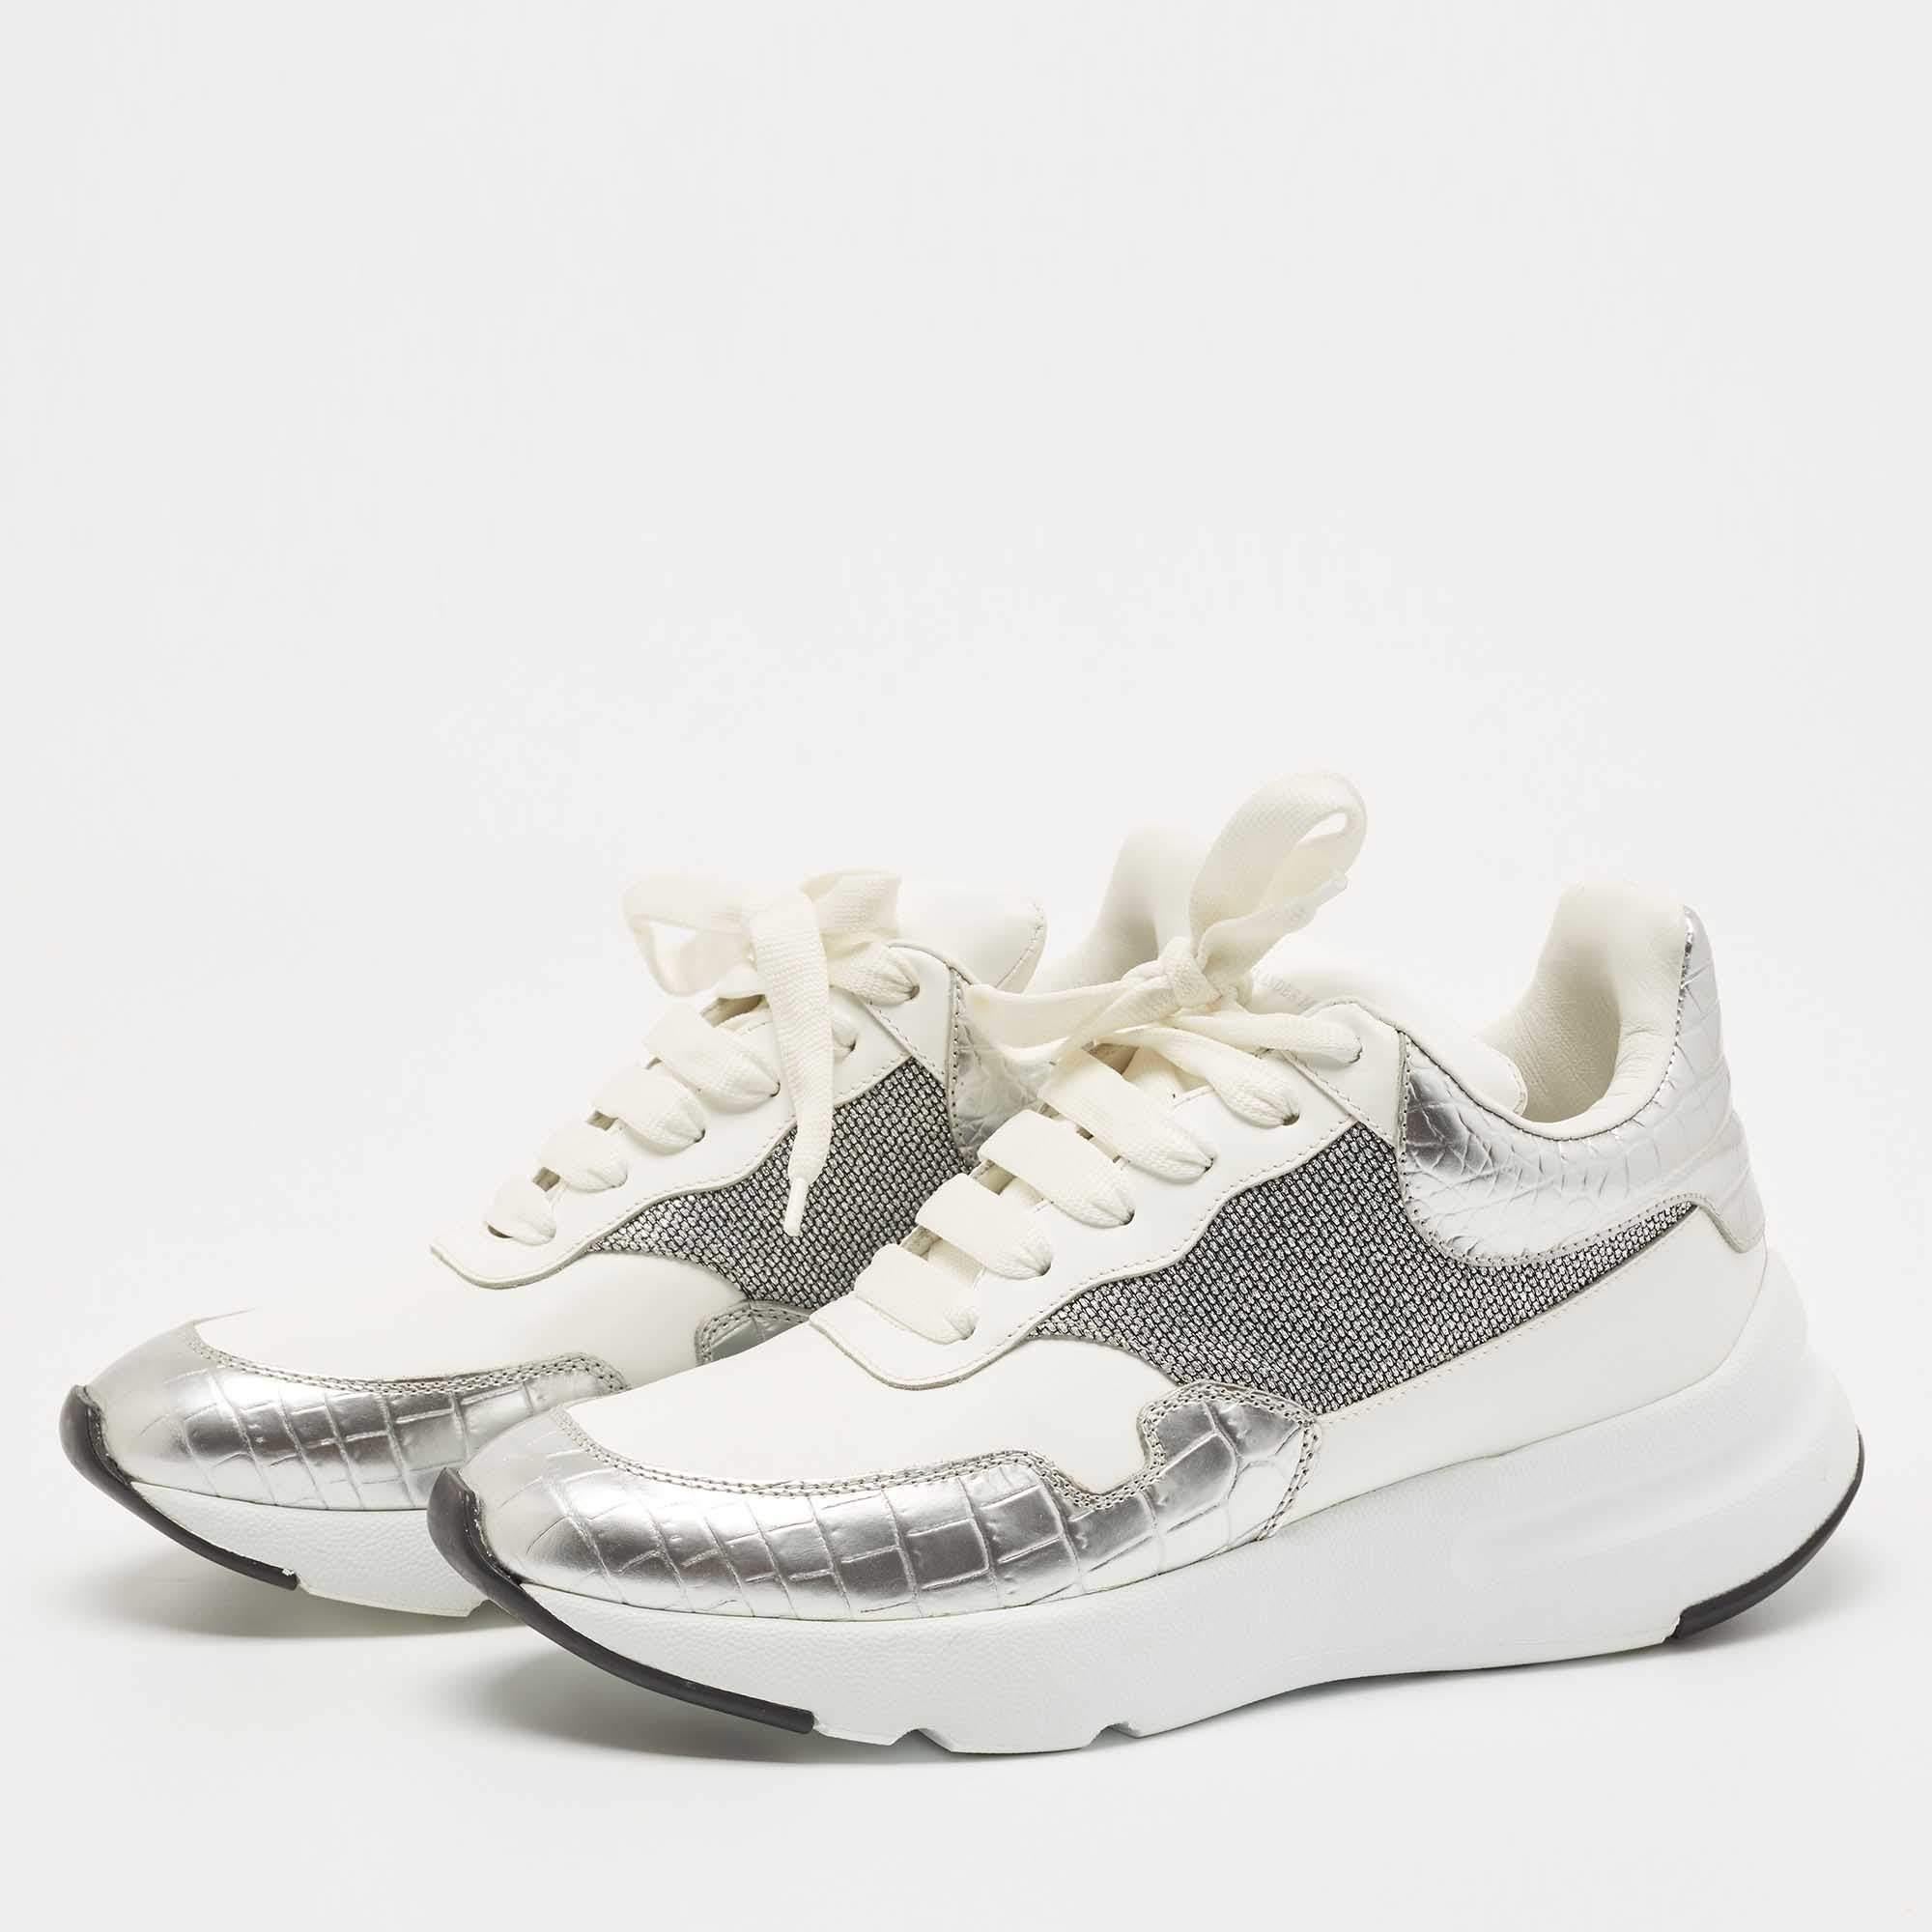 Designed to elevate your style quotient and give you comfort at the same time, these Alexander McQueen sneakers are crafted using the best materials. Pair them with your casuals for a cool look.

Includes: Original Dustbag, Original Box, Info